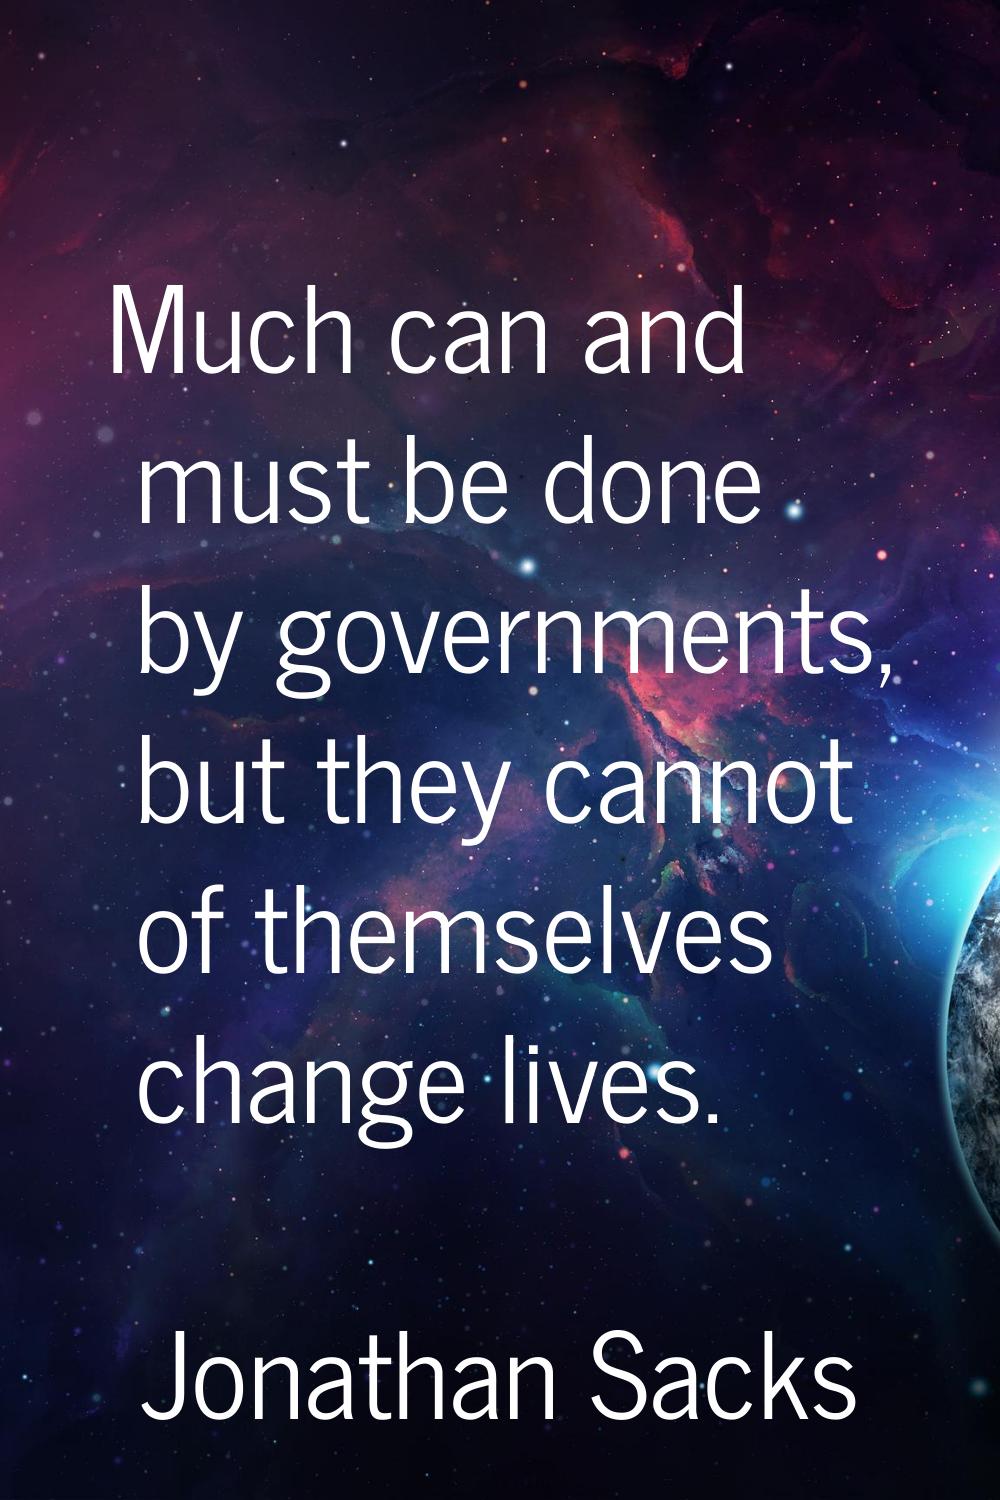 Much can and must be done by governments, but they cannot of themselves change lives.